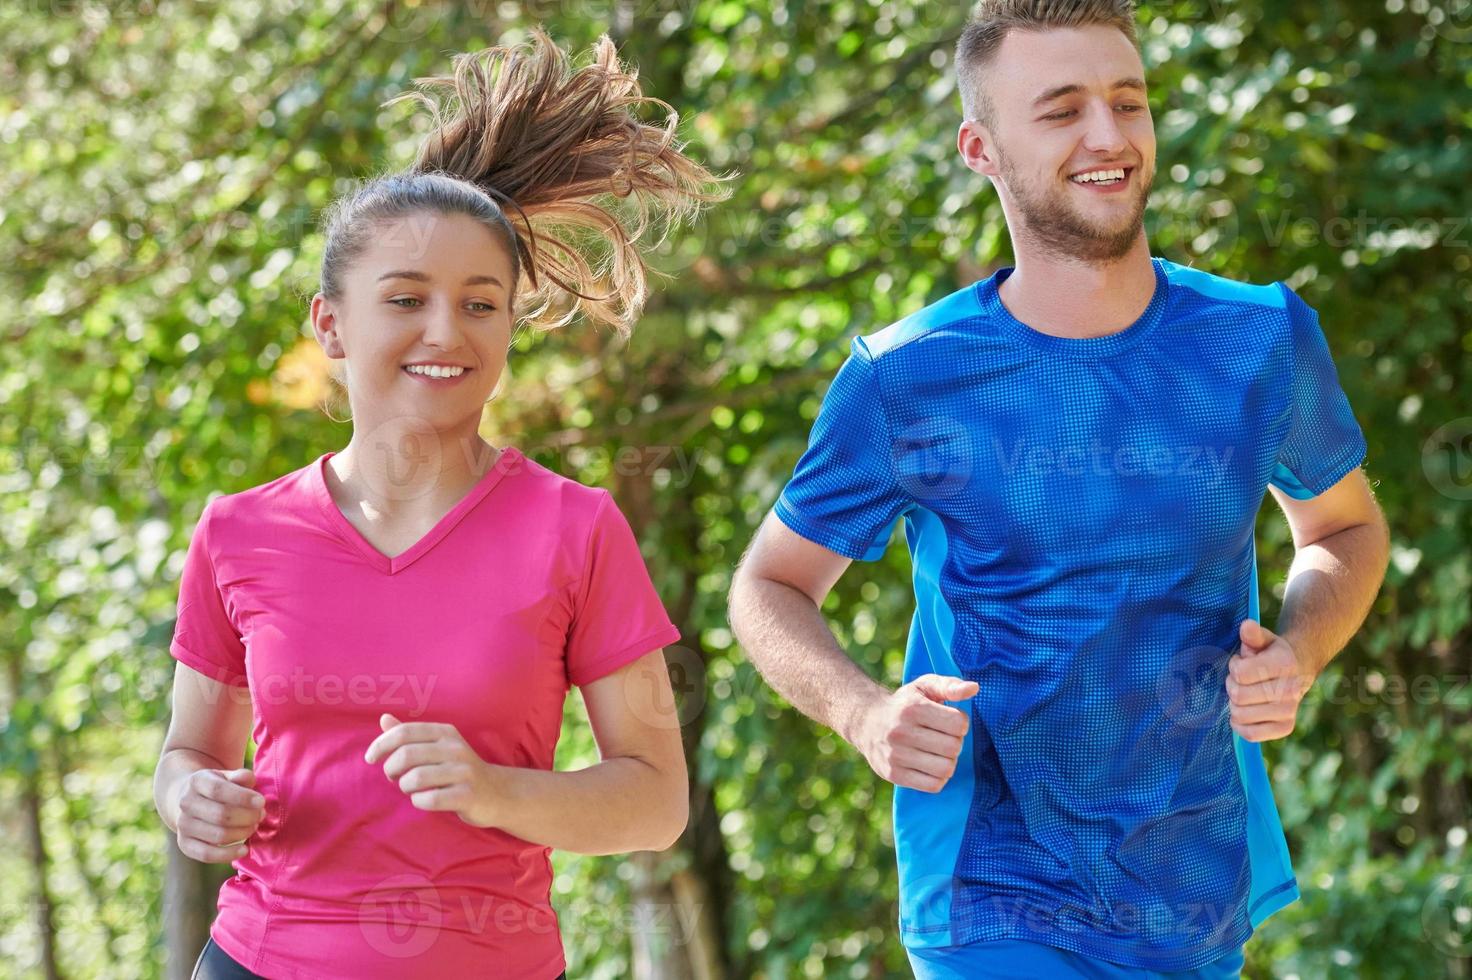 couple enjoying in a healthy lifestyle while jogging on a country road photo